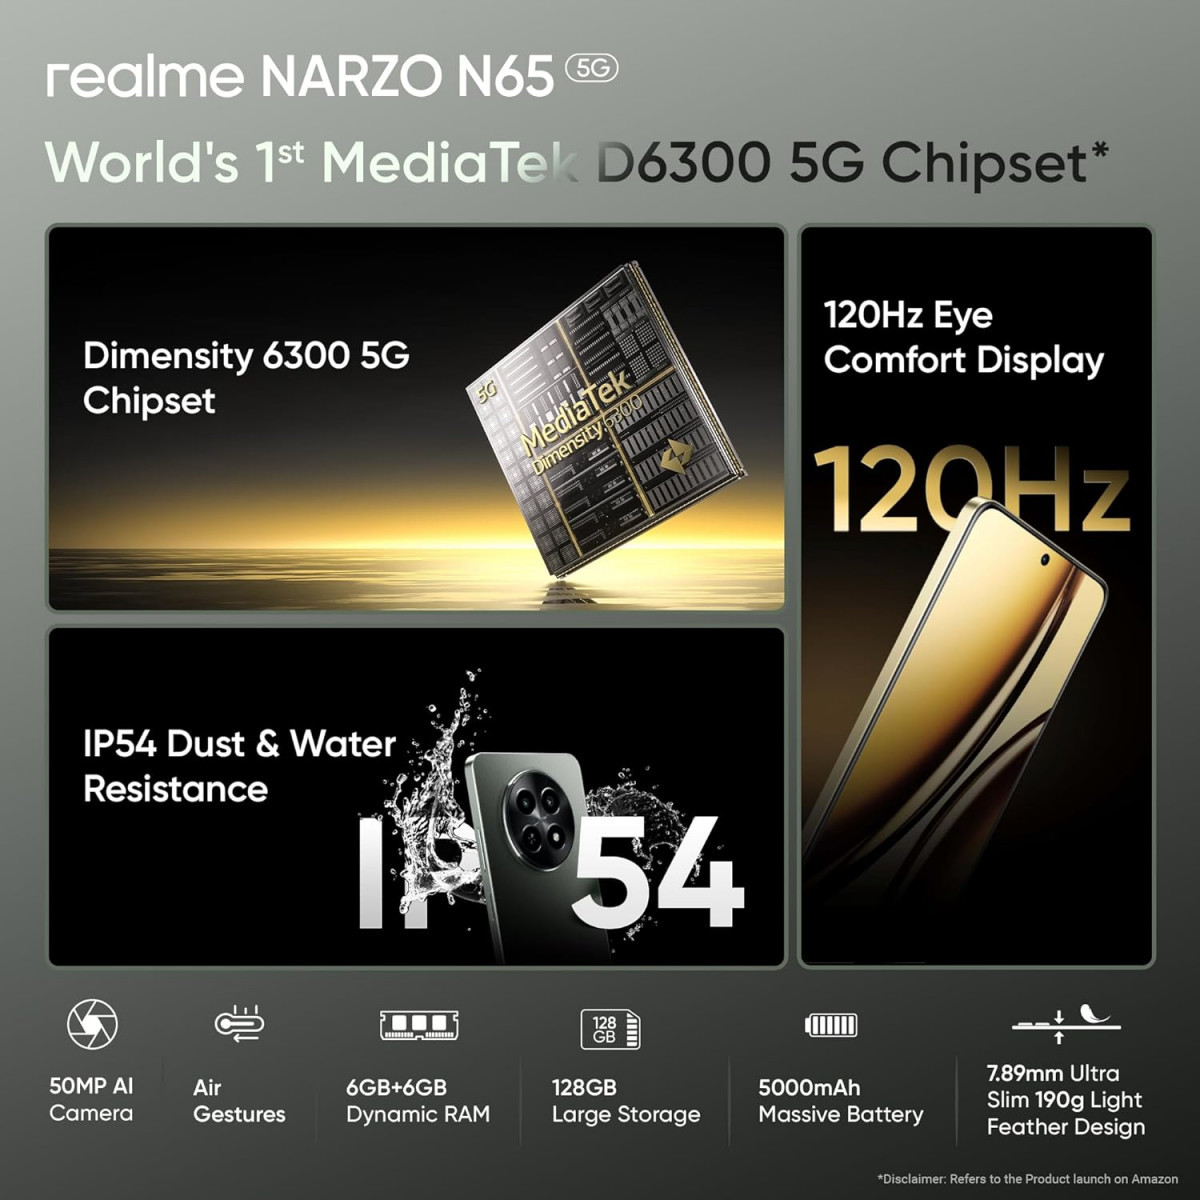 realme NARZO N65 5G Deep Green 4GB RAM 128GB Storage India039s 1st D6300 5G Chipset  Ultra Slim 190g Design  120Hz Eye Comfort Display  50MP AI Camera Charger in The Box